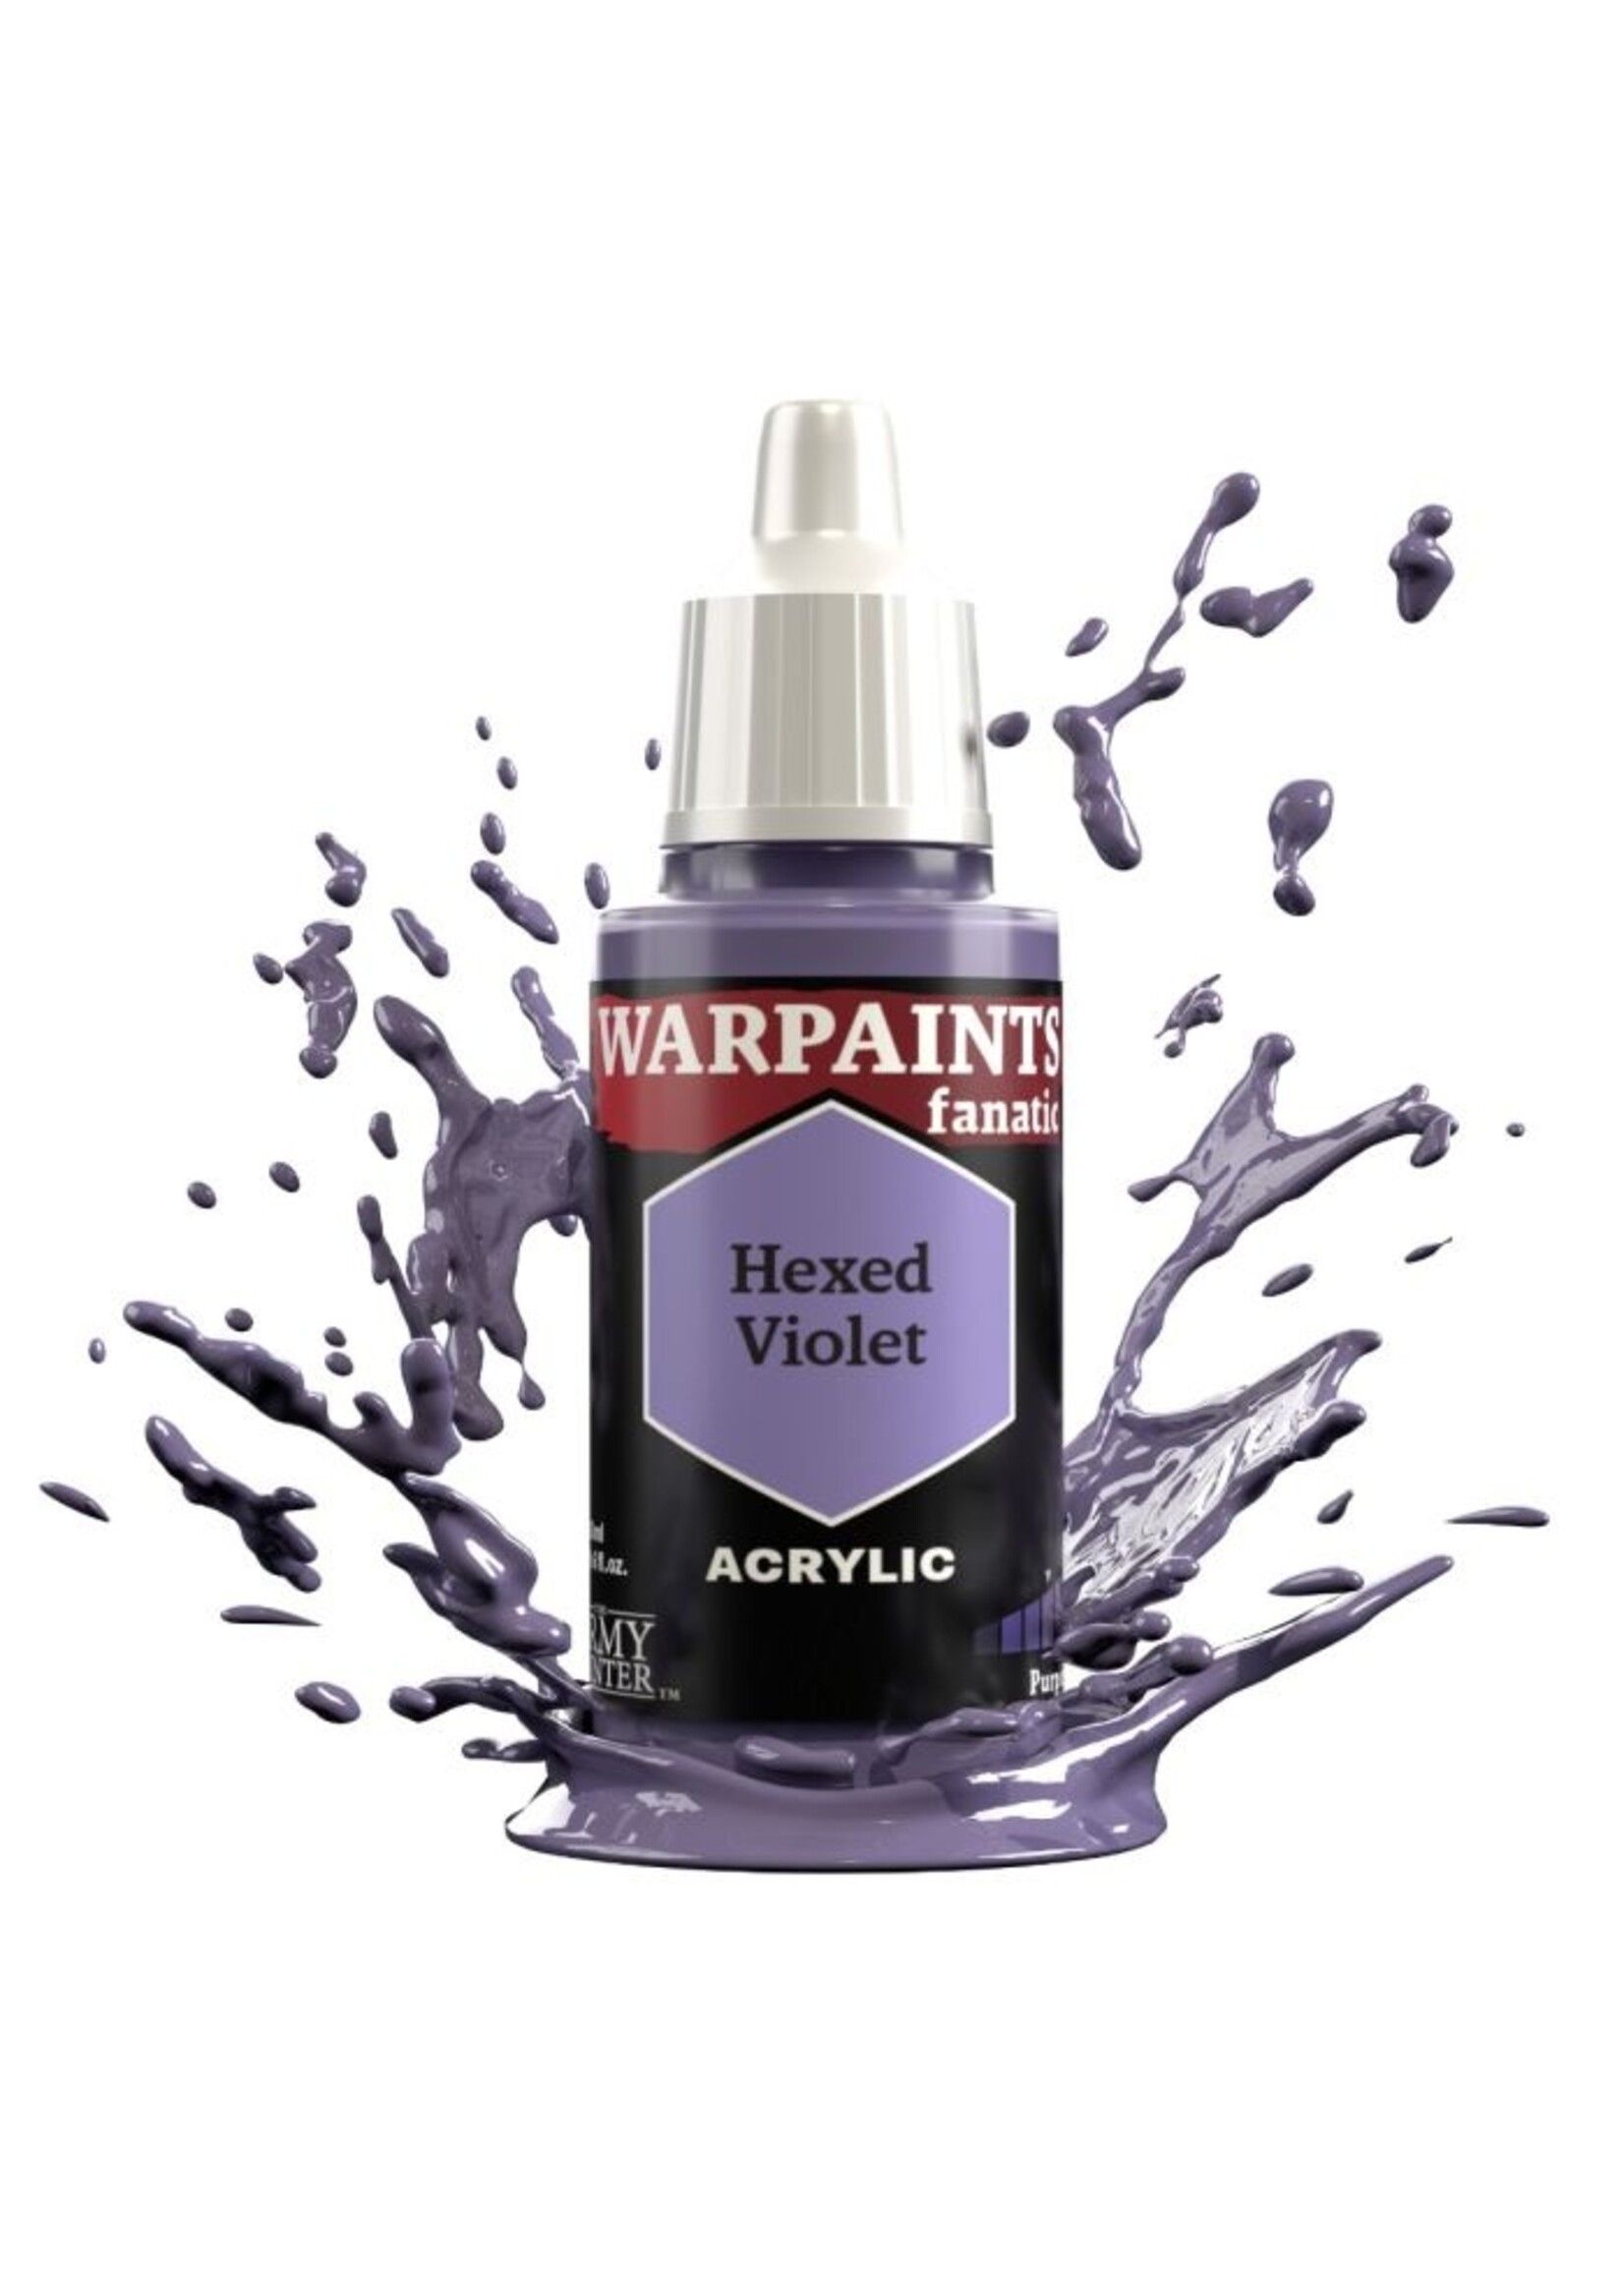 The Army Painter AMYWP3130 - Hexed Violet